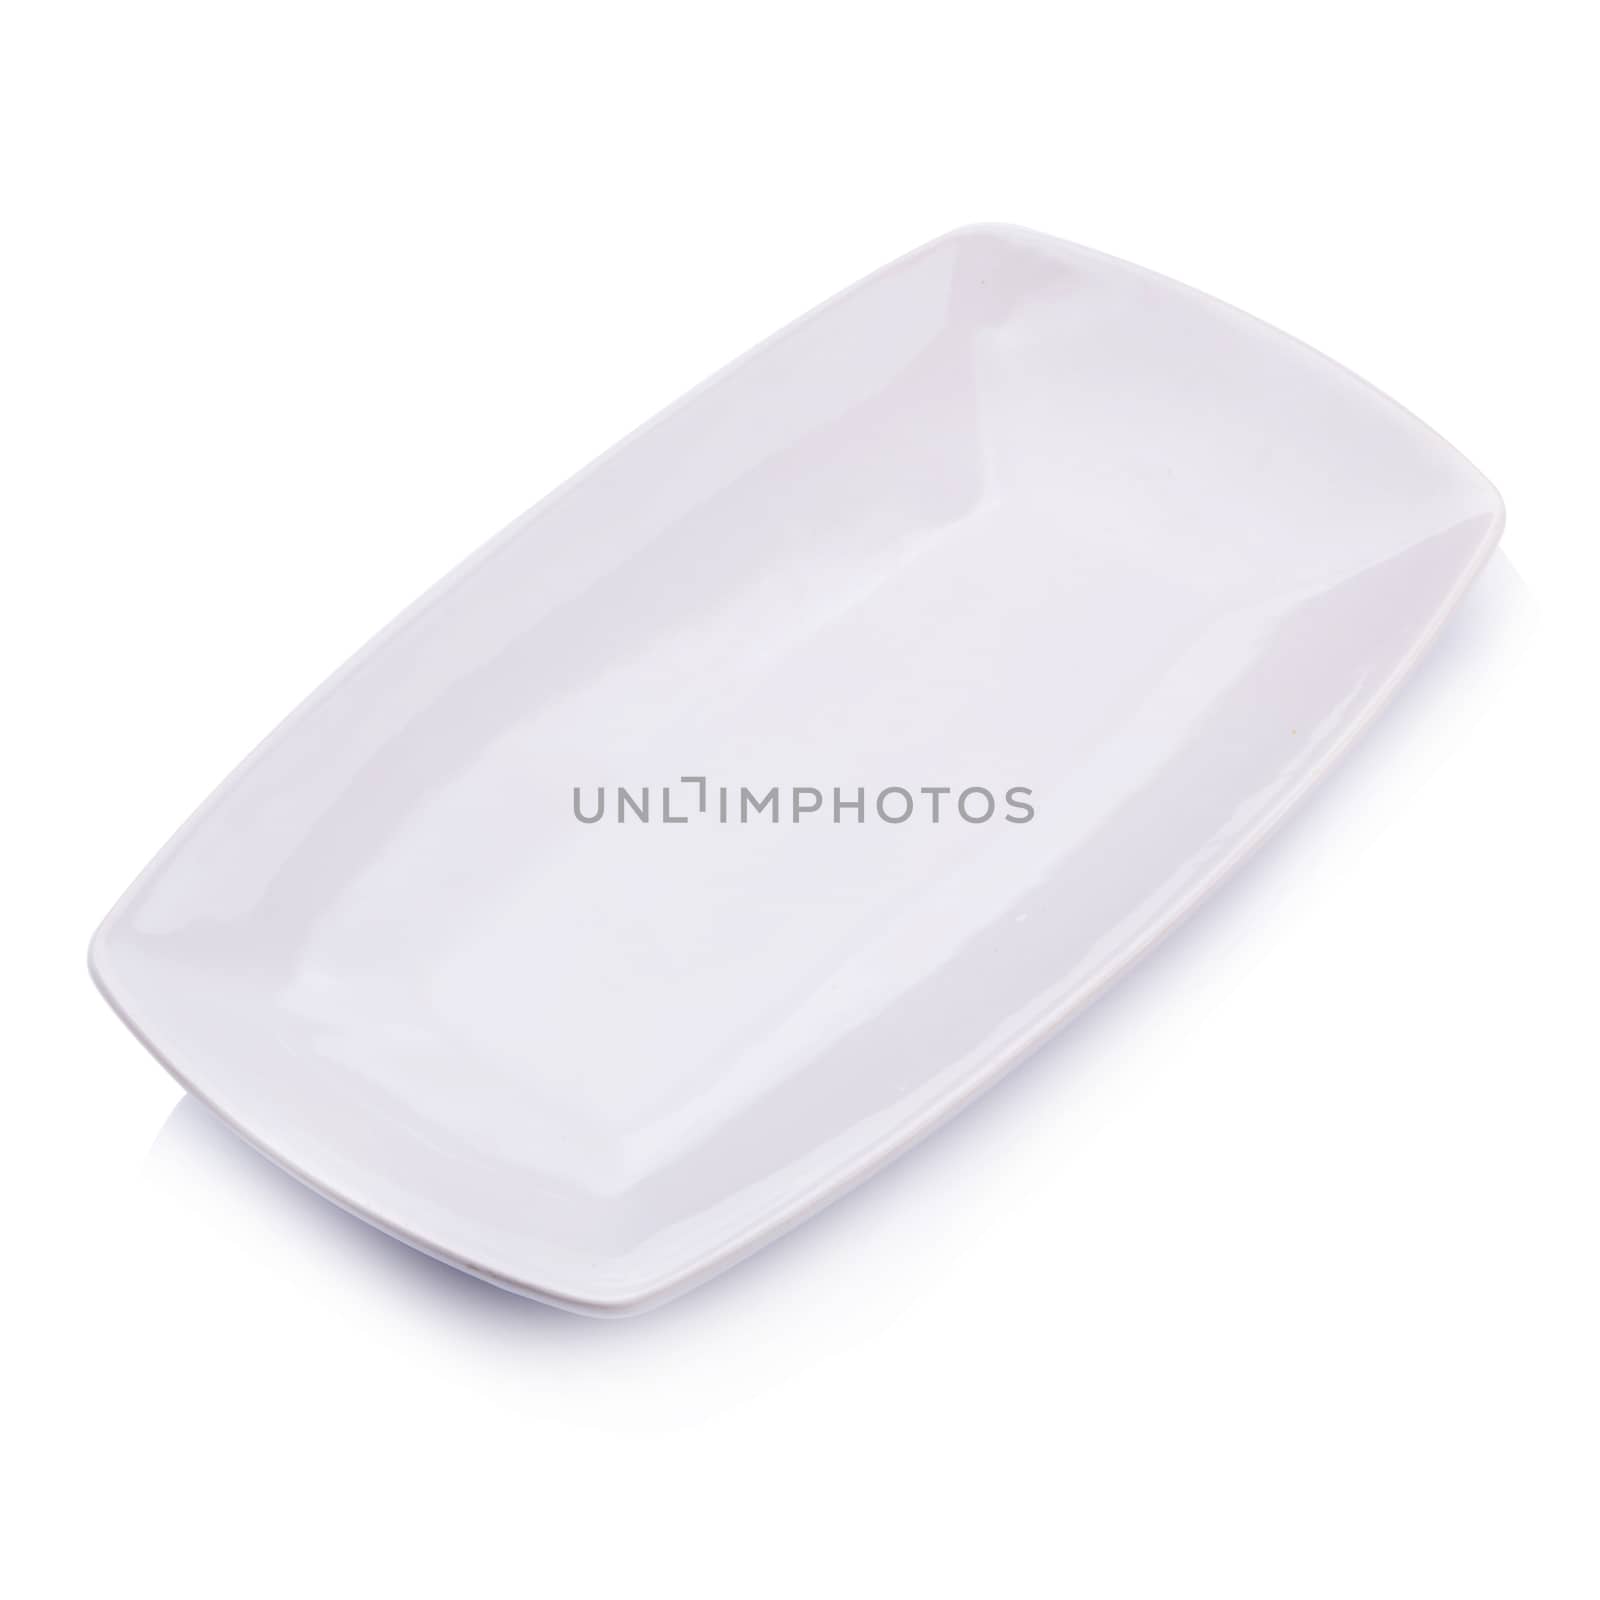 Ceramic white plate on a white background by kaiskynet